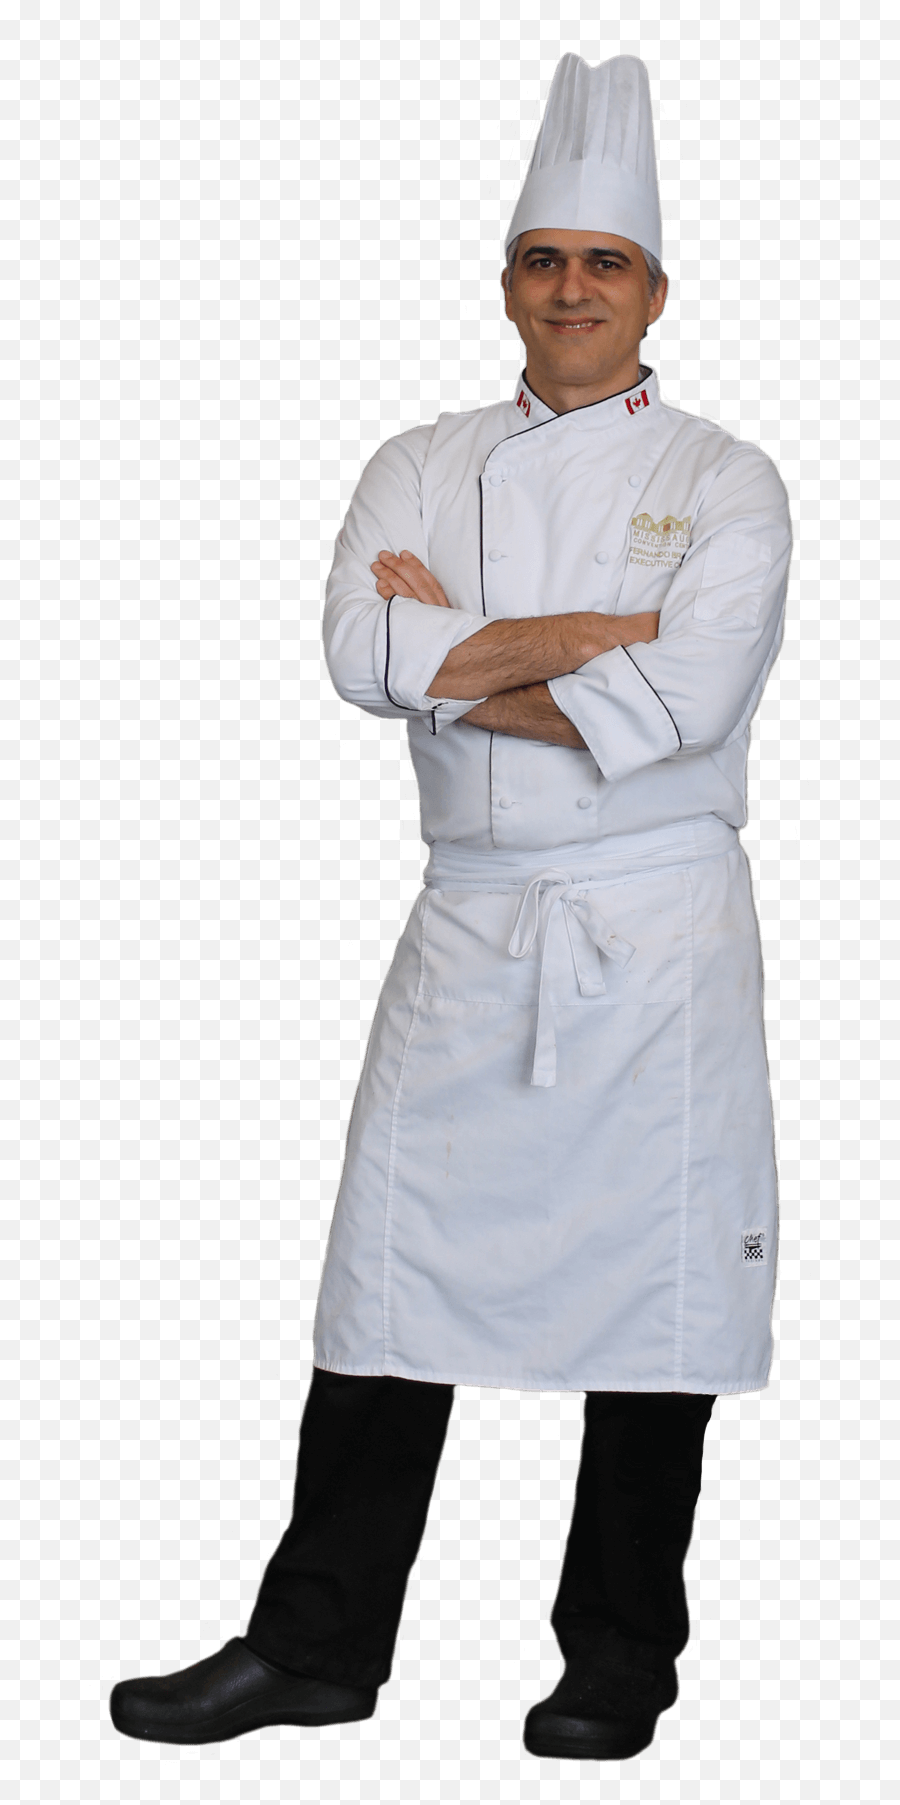 Male Chef Png Image For Free Download - Chef Png Emoji,Chef Png